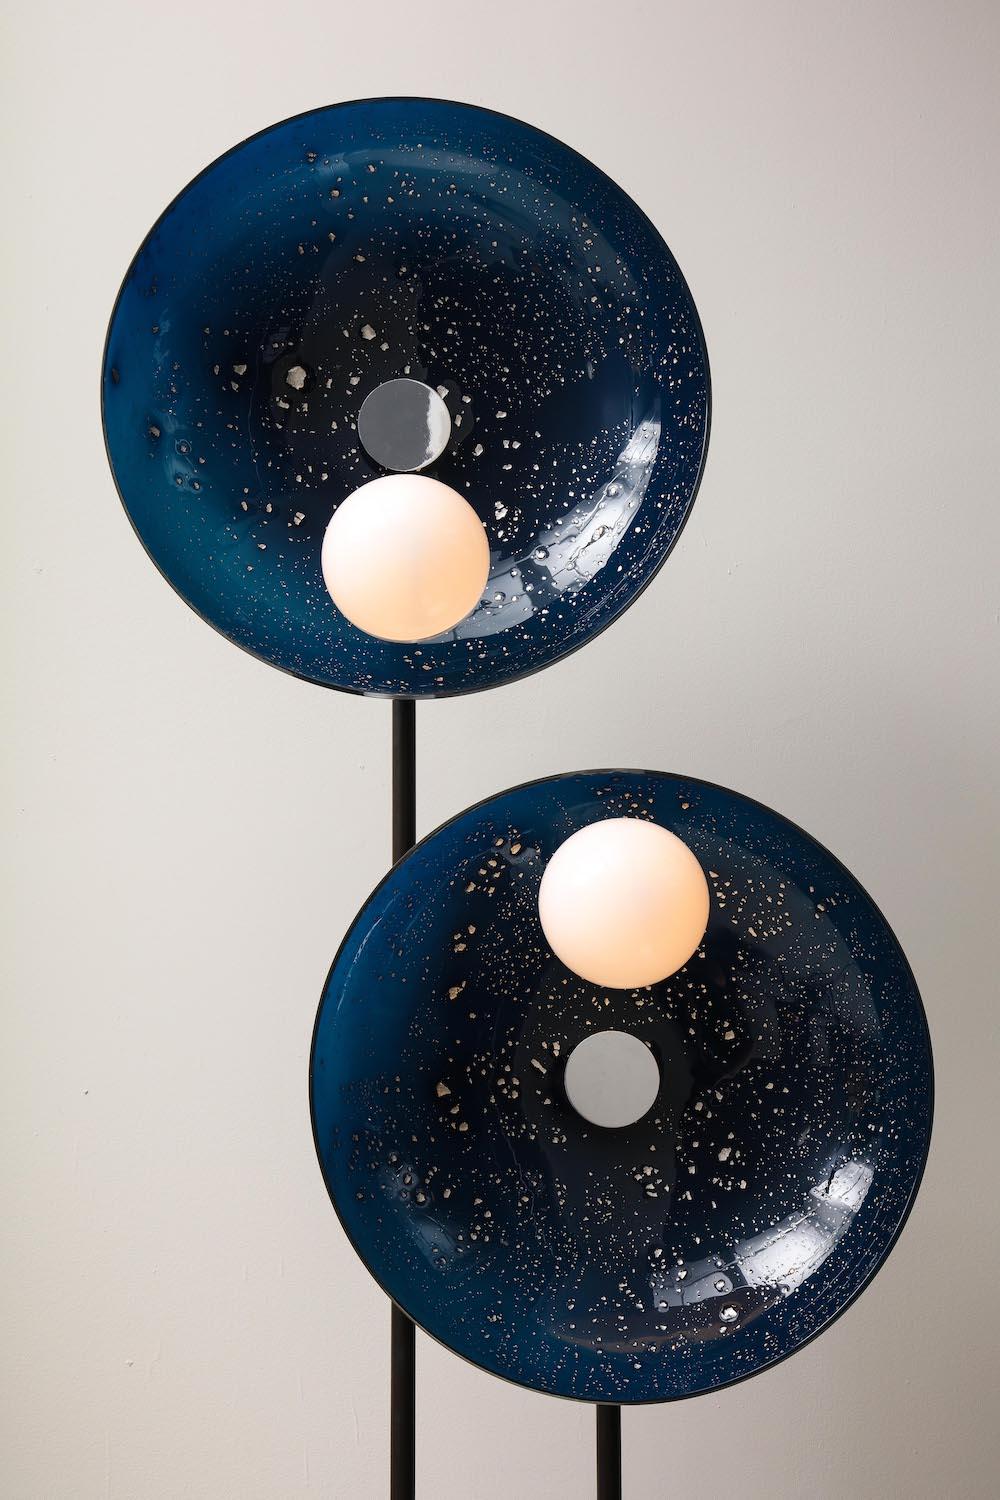 Two shallow glass bowls in ultramarine blue, with applied platinum foil, and two glass-globe shades. Each globe is half opaque-white and half clear. All glass is hand-blown by the artist. Black-patinated bent brass arm with chrome-plated mounts.